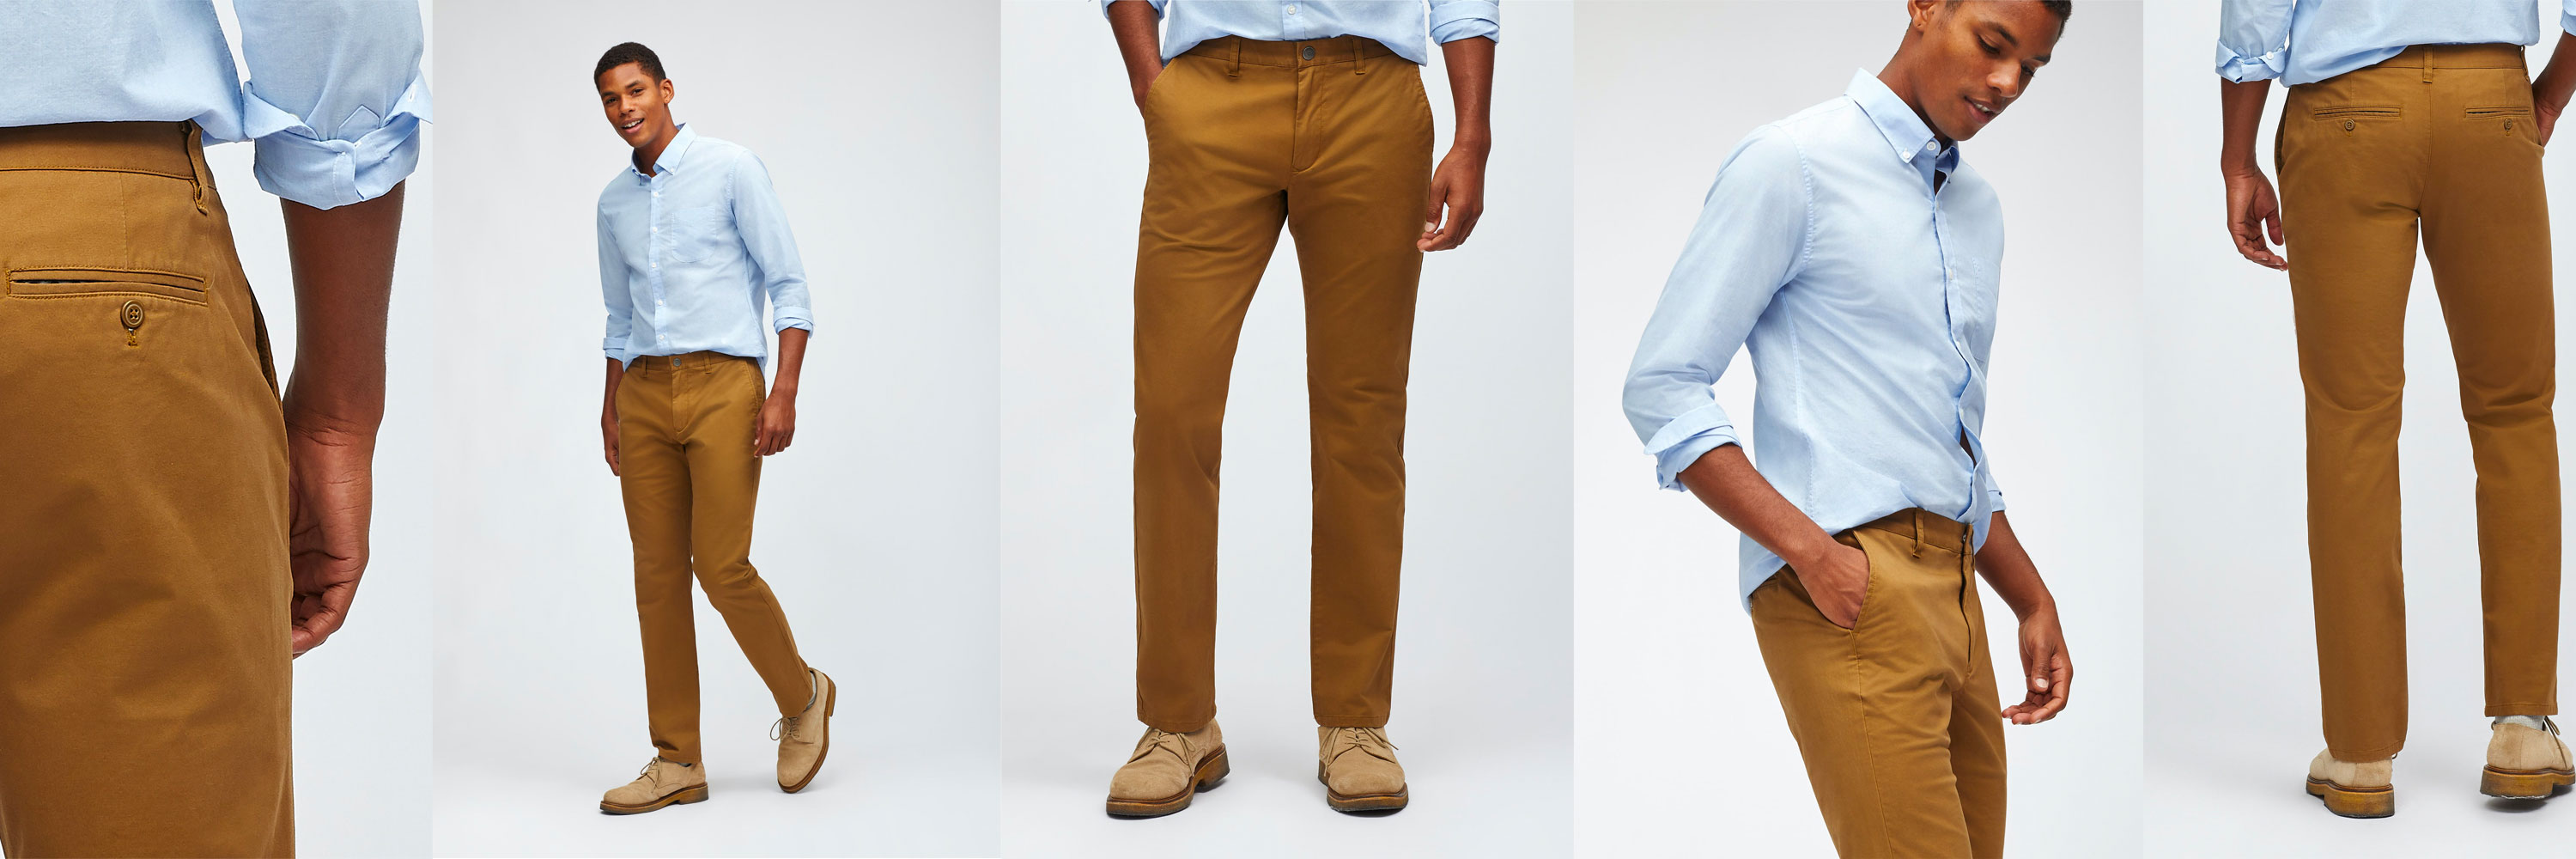 7 Must Have Chinos And Shirt Colors For 7 Different Looks This Season   Polo shirt outfits Polo outfit Chinos men outfit